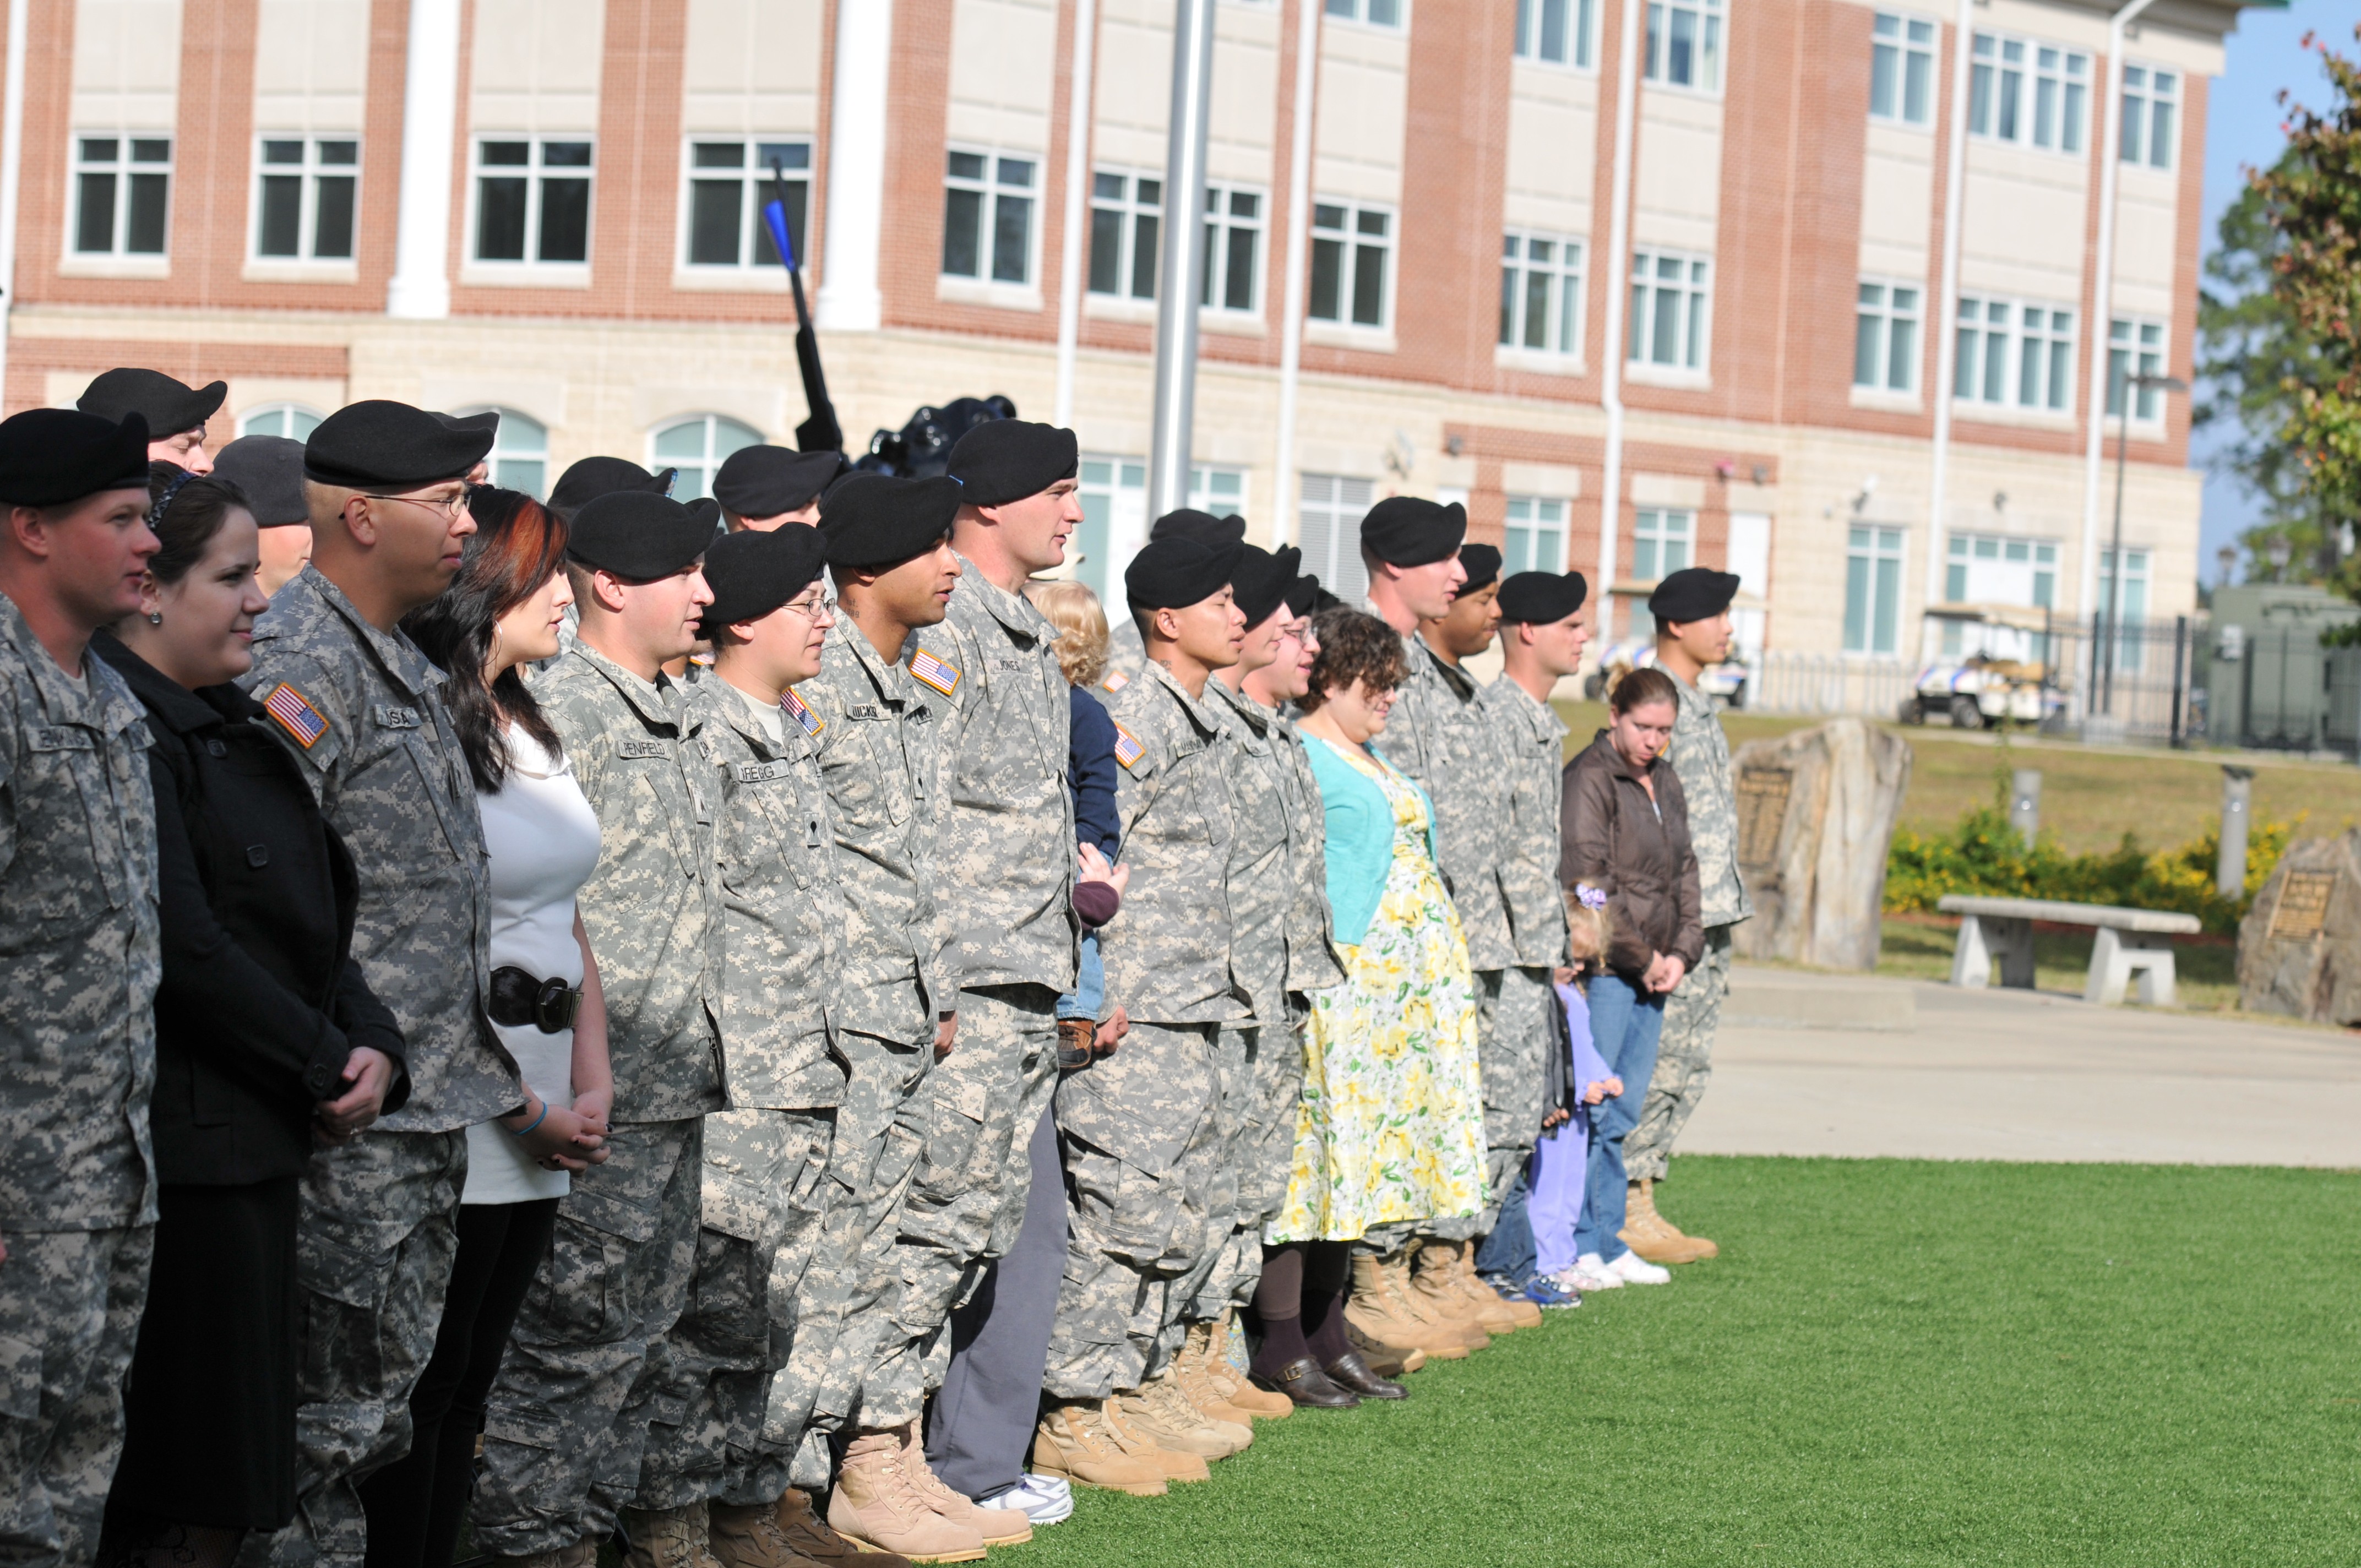 Marne Division hosts 'mass re-enlistment' ceremony | Article | The United States Army